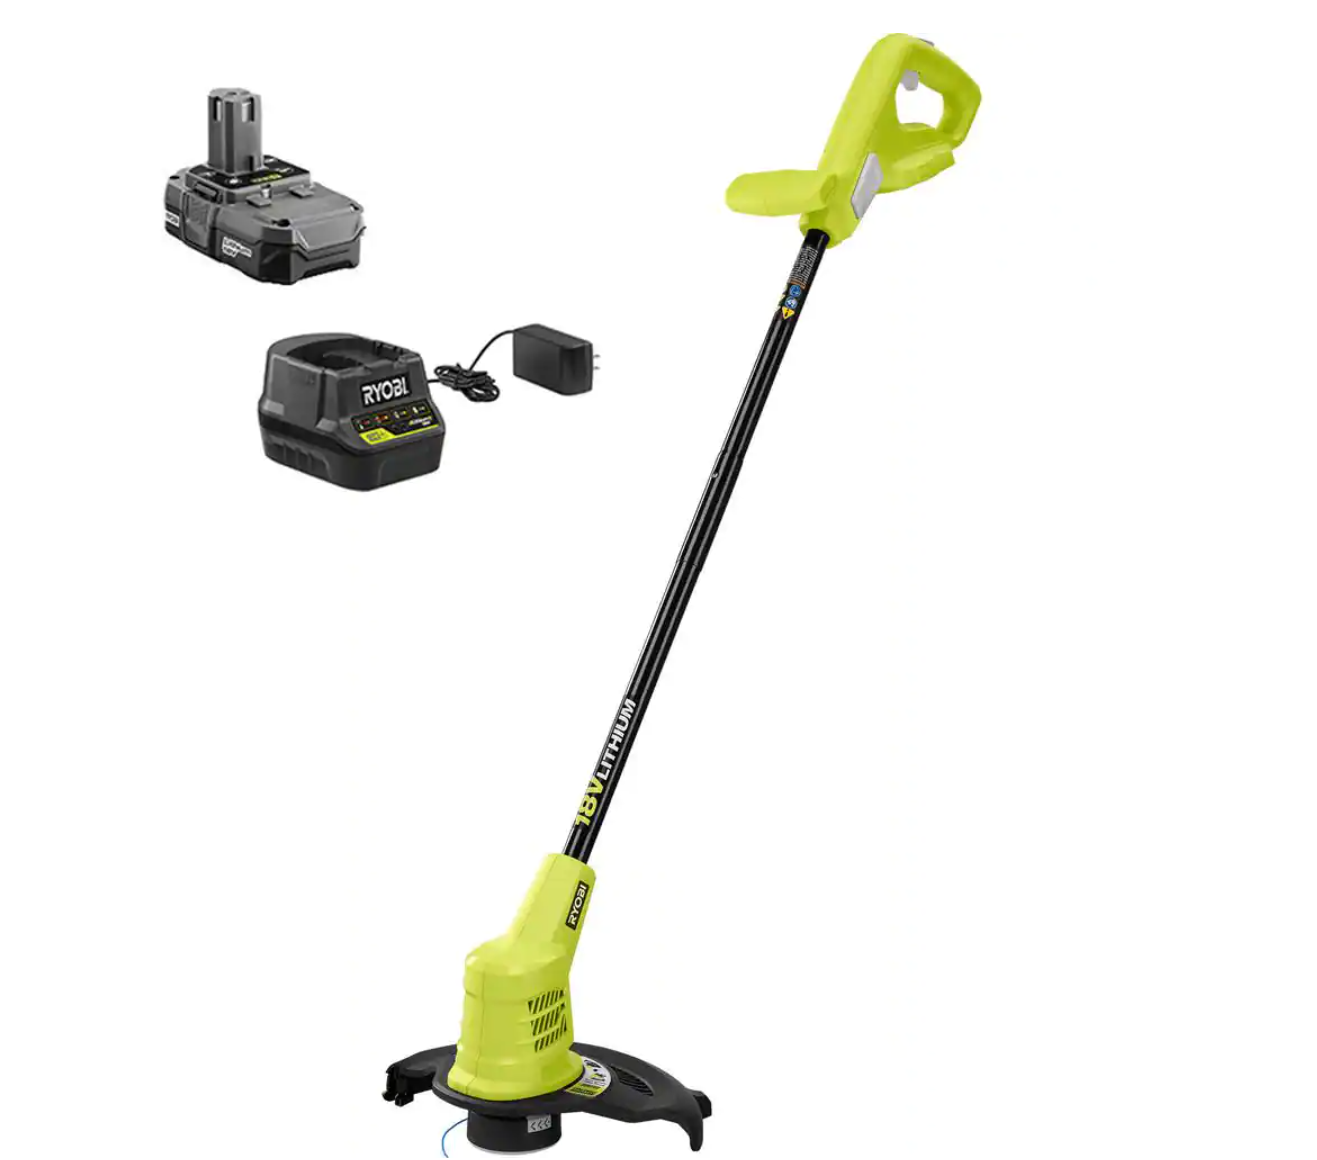 https://bigbigmart.com/wp-content/uploads/2022/07/RYOBI-P20130-ONE-18V-10-in.-Cordless-Battery-String-Trimmer-with-1.5-Ah-Battery-and-Charger.png